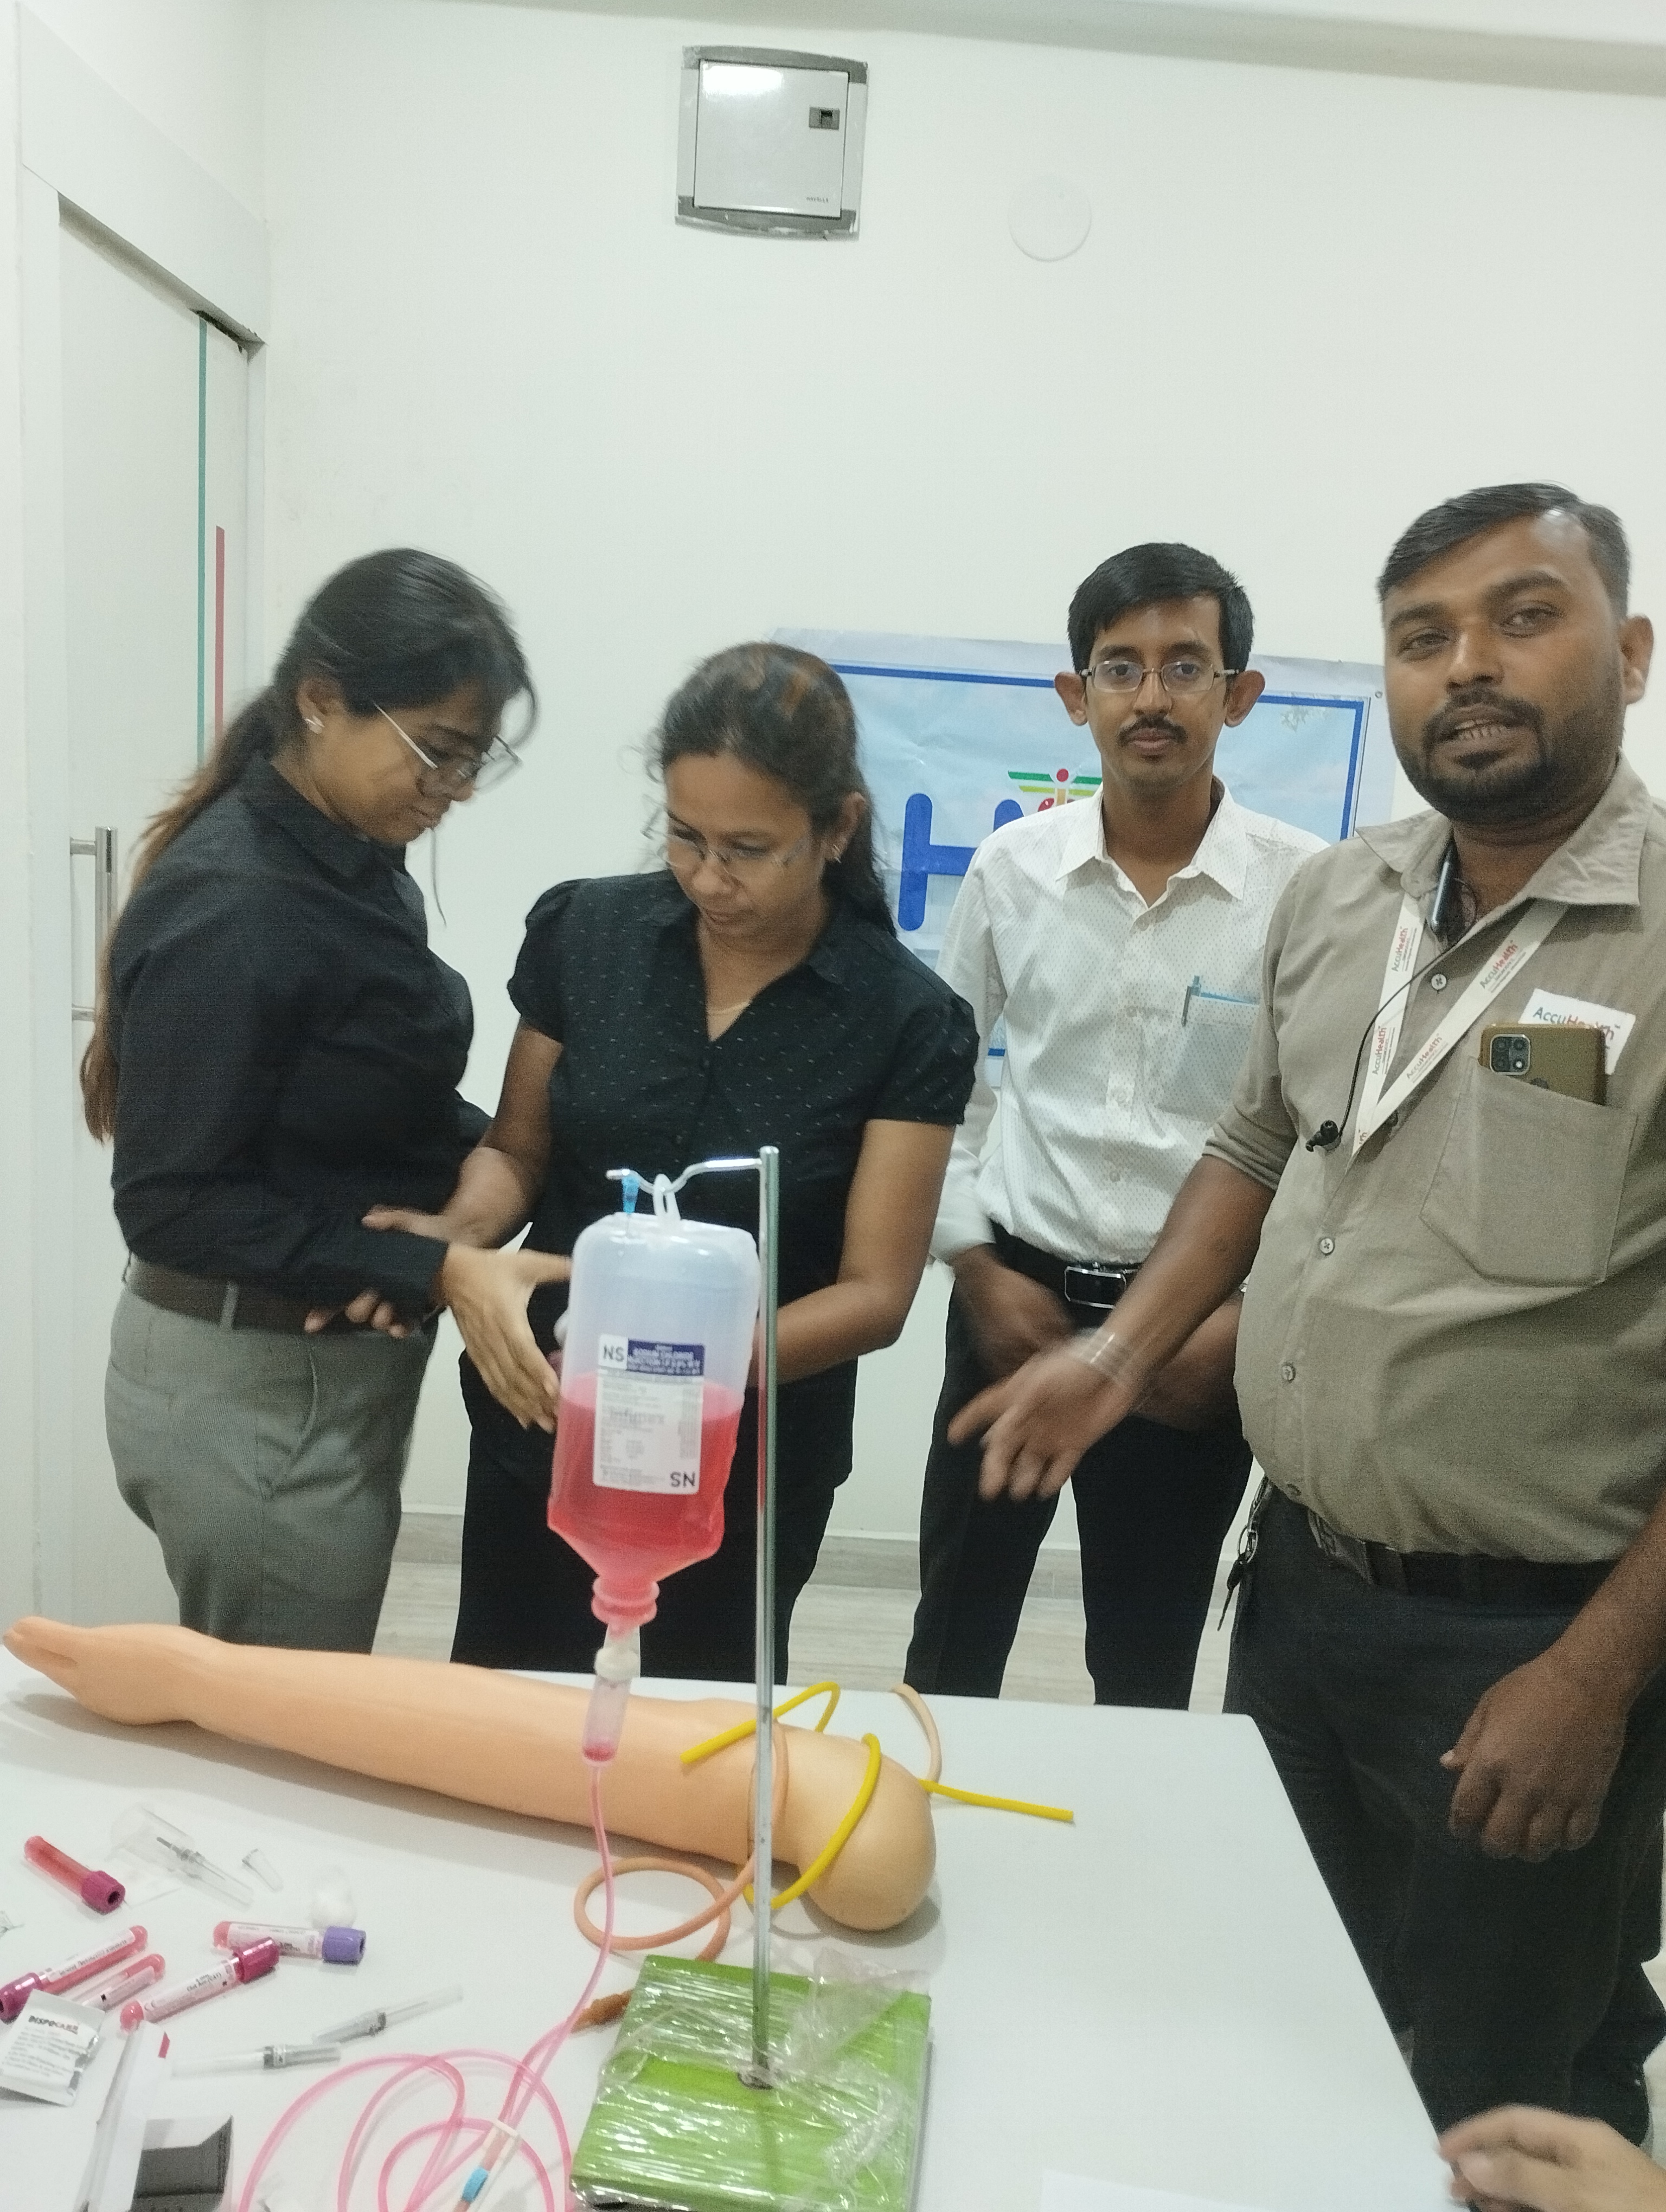 Blood Collection Procedure with Artifical Arm and Safe Injection Practice - Accuhealth Diagnostic Centre, Baruipur, W.B 